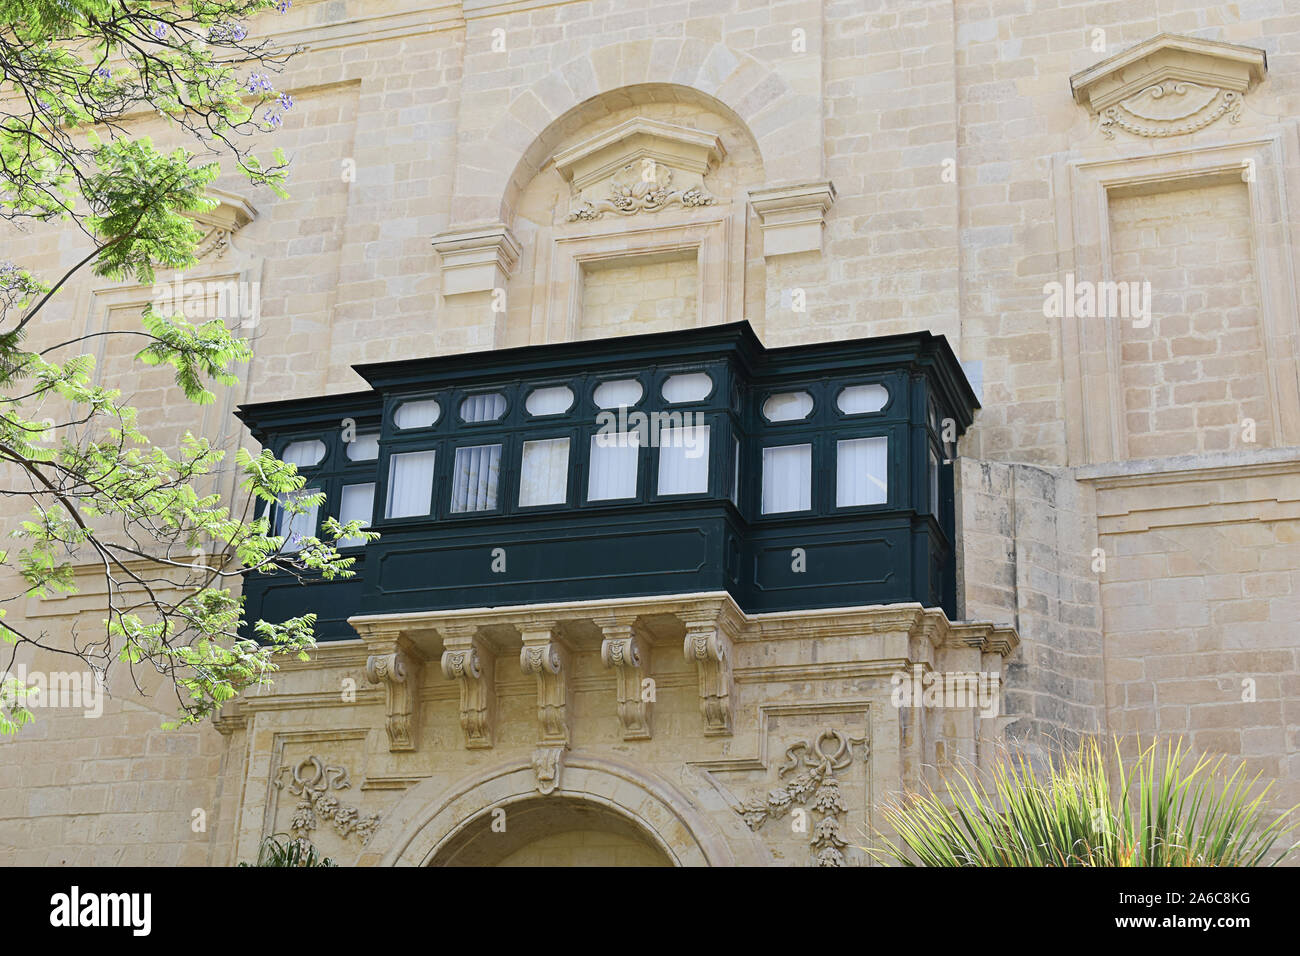 Architectural Balcony, Great Hall entrance, Prince Alfred courtyard, Grand Master's Palace, Valletta, Malta Stock Photo